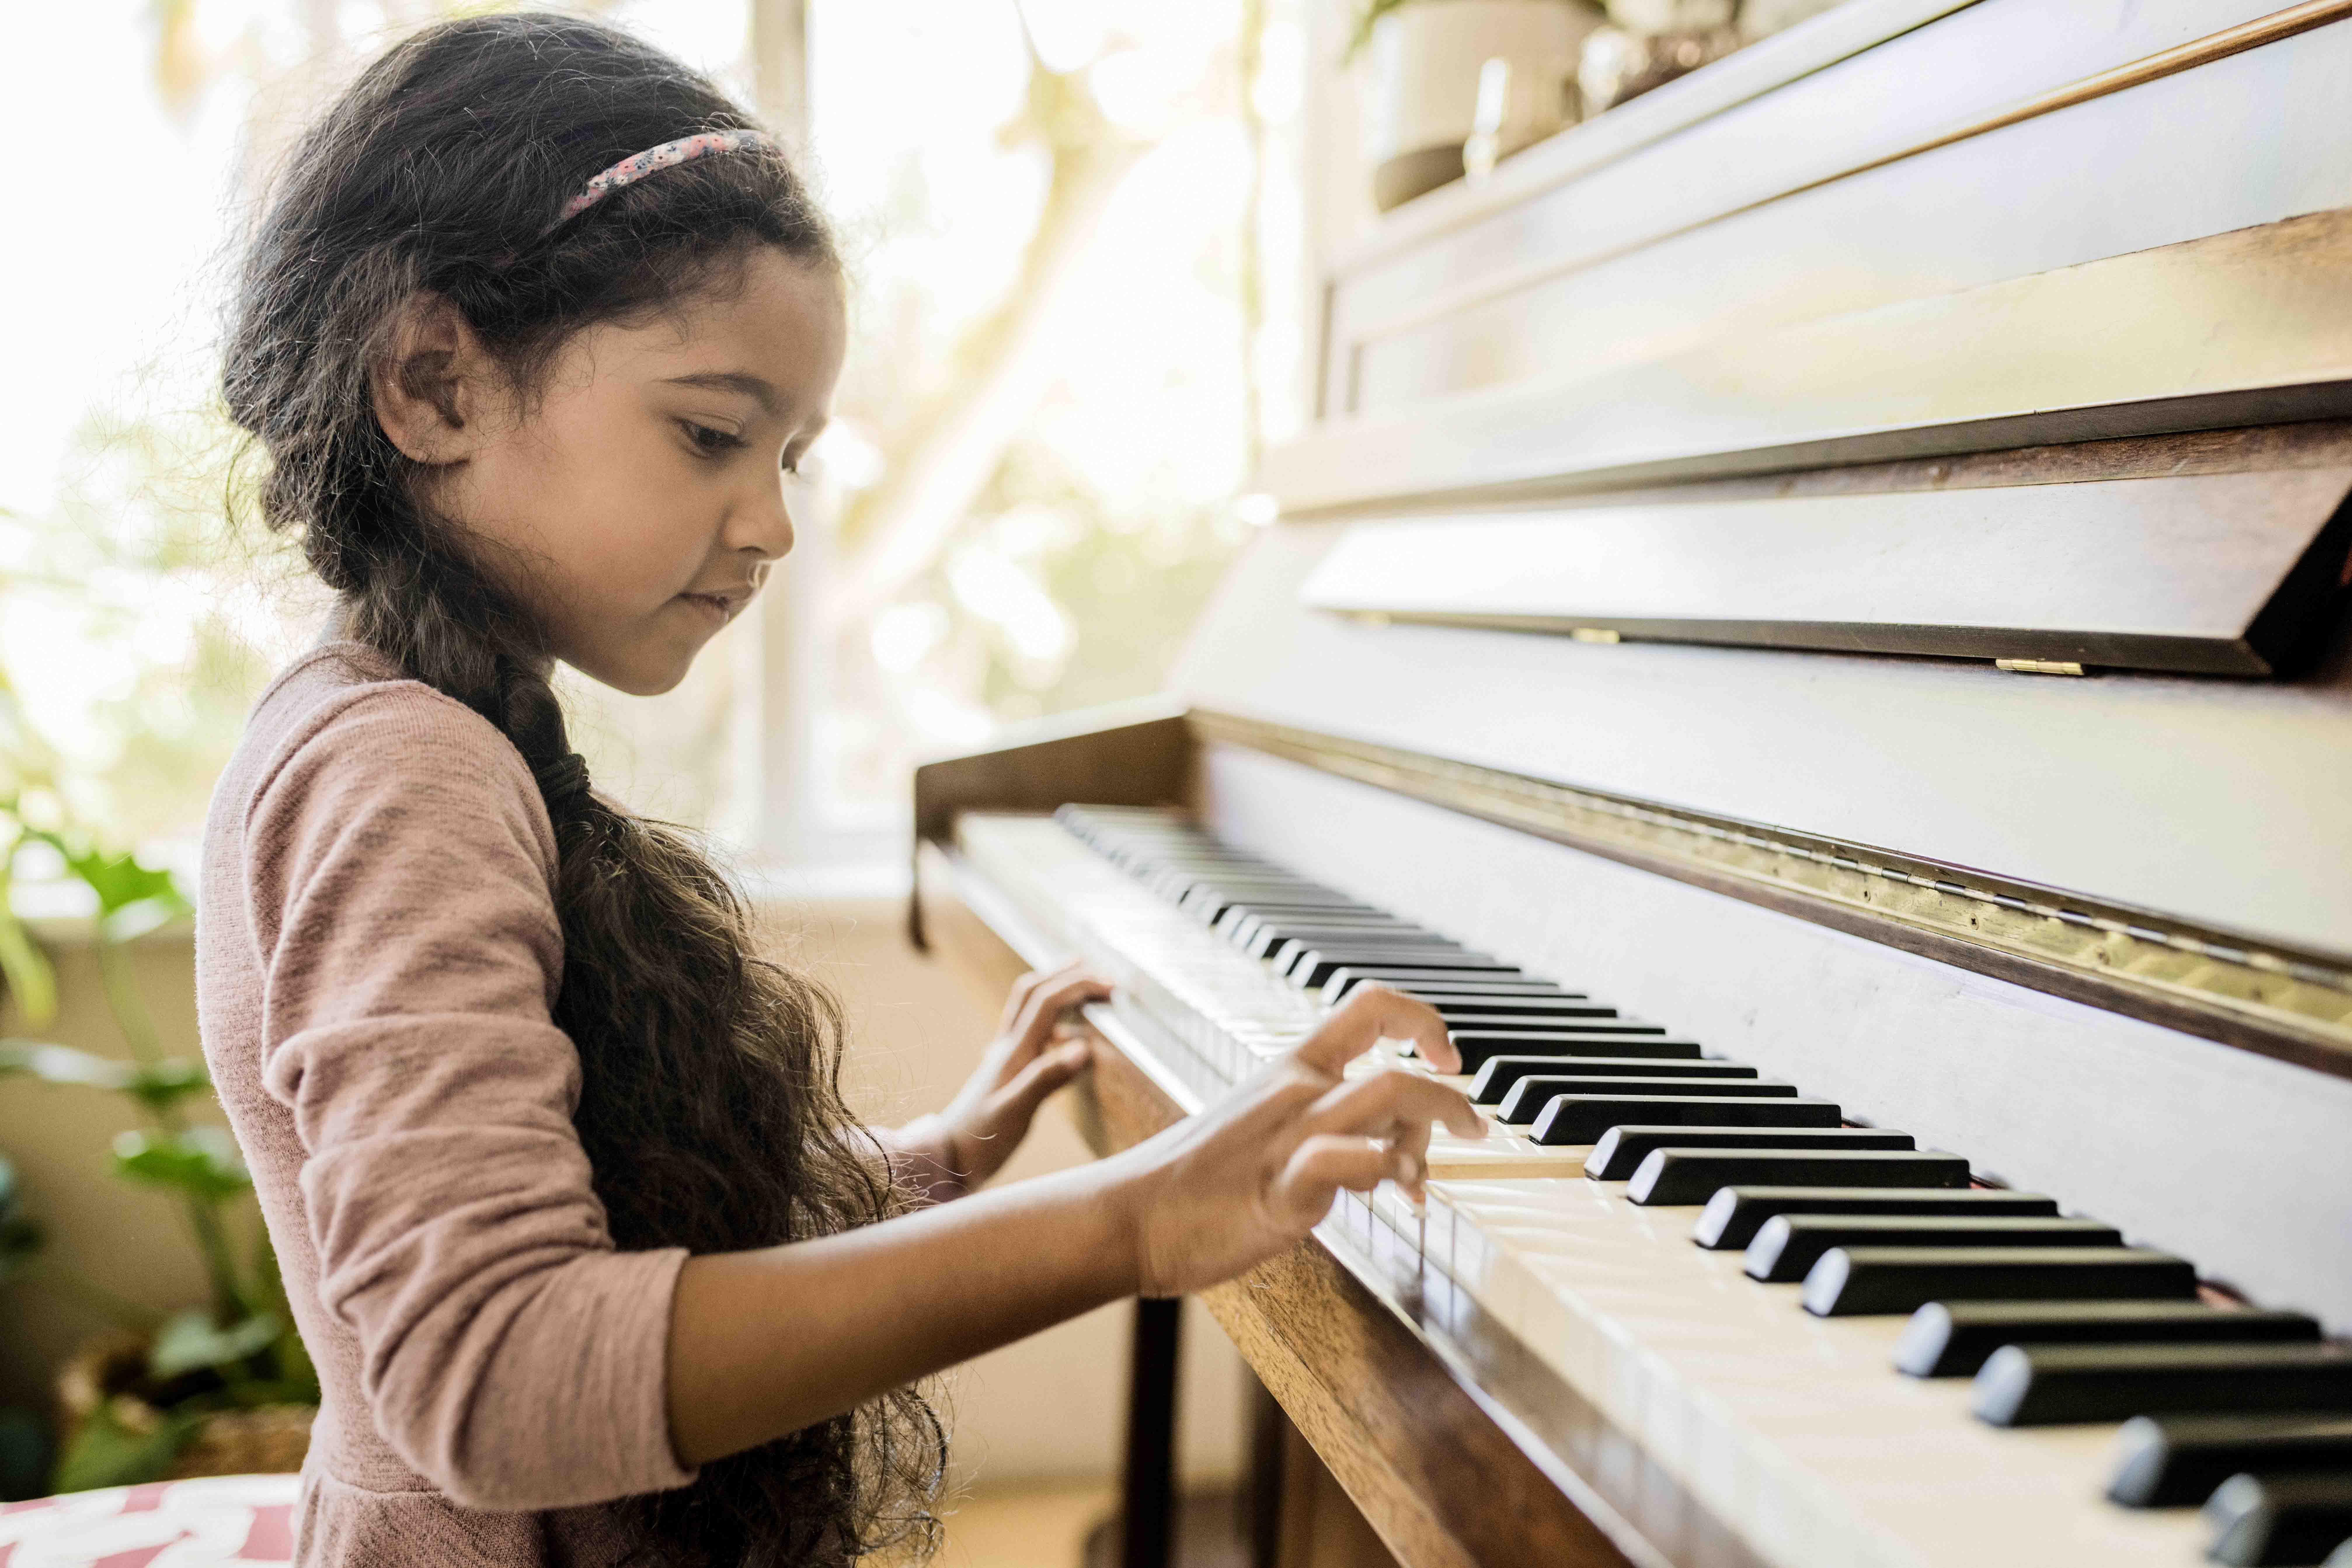 Side view of a young girl, about 6 or 7 years old, playing the piano